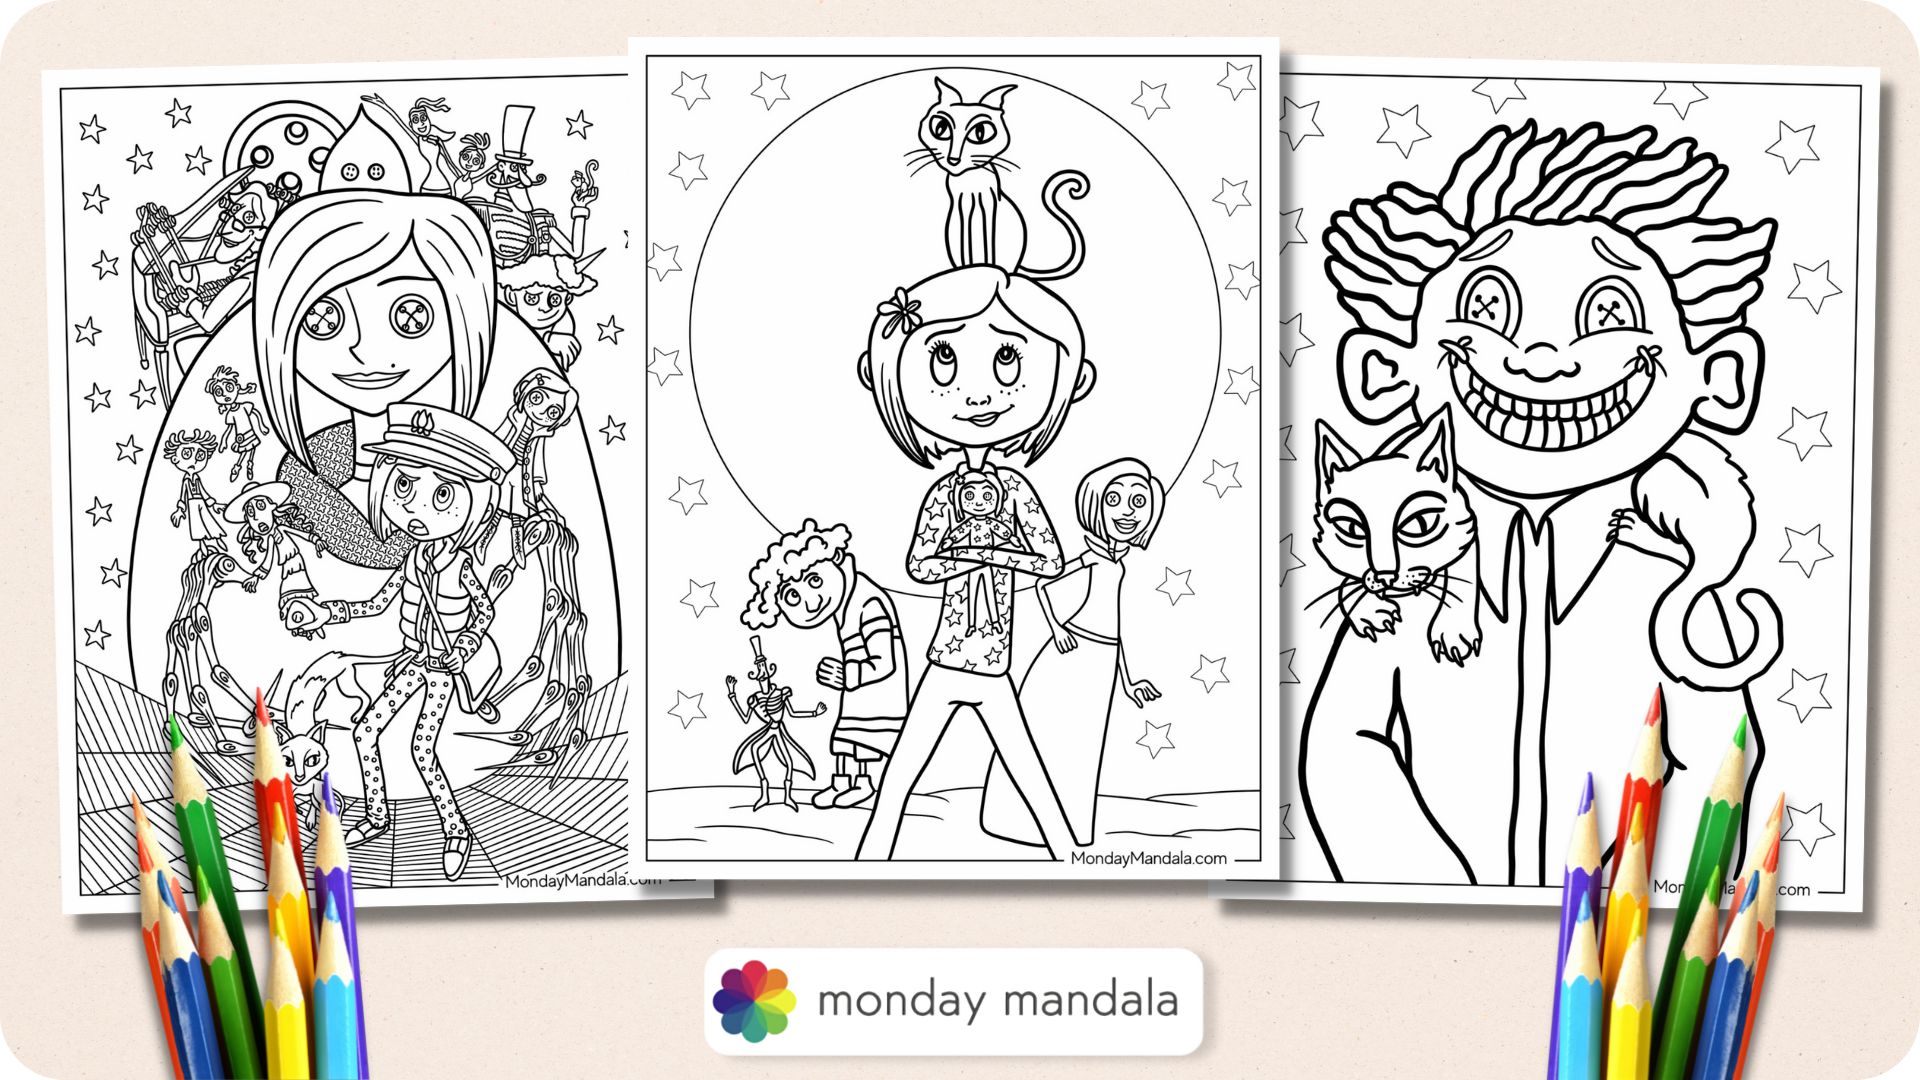 Coraline coloring pages free pdf printables